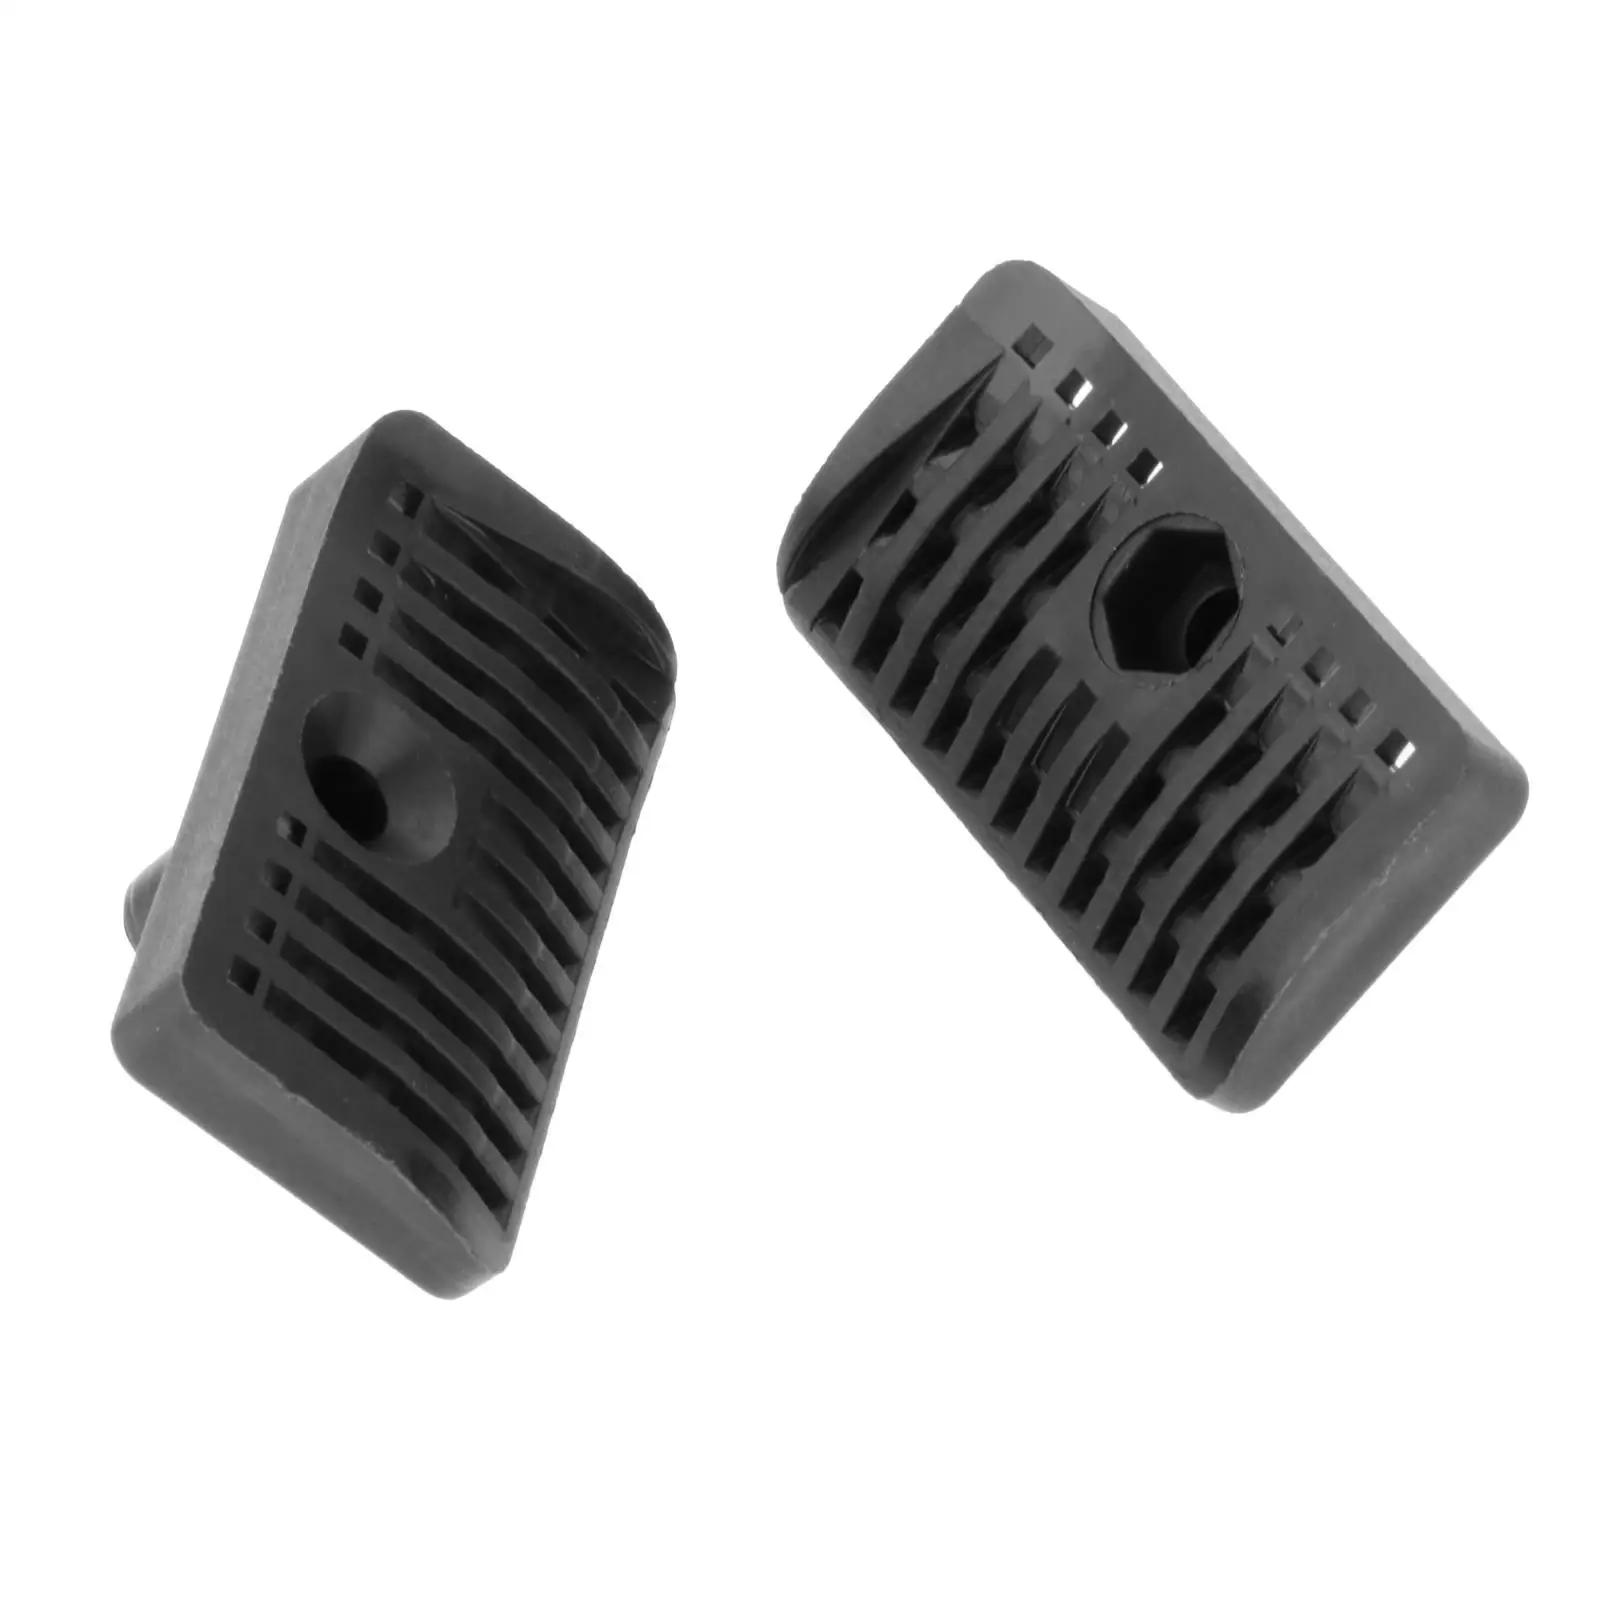 Water Inlet Covers Plastic Durable for Yamaha Accessories Parts Easy to Install Replace